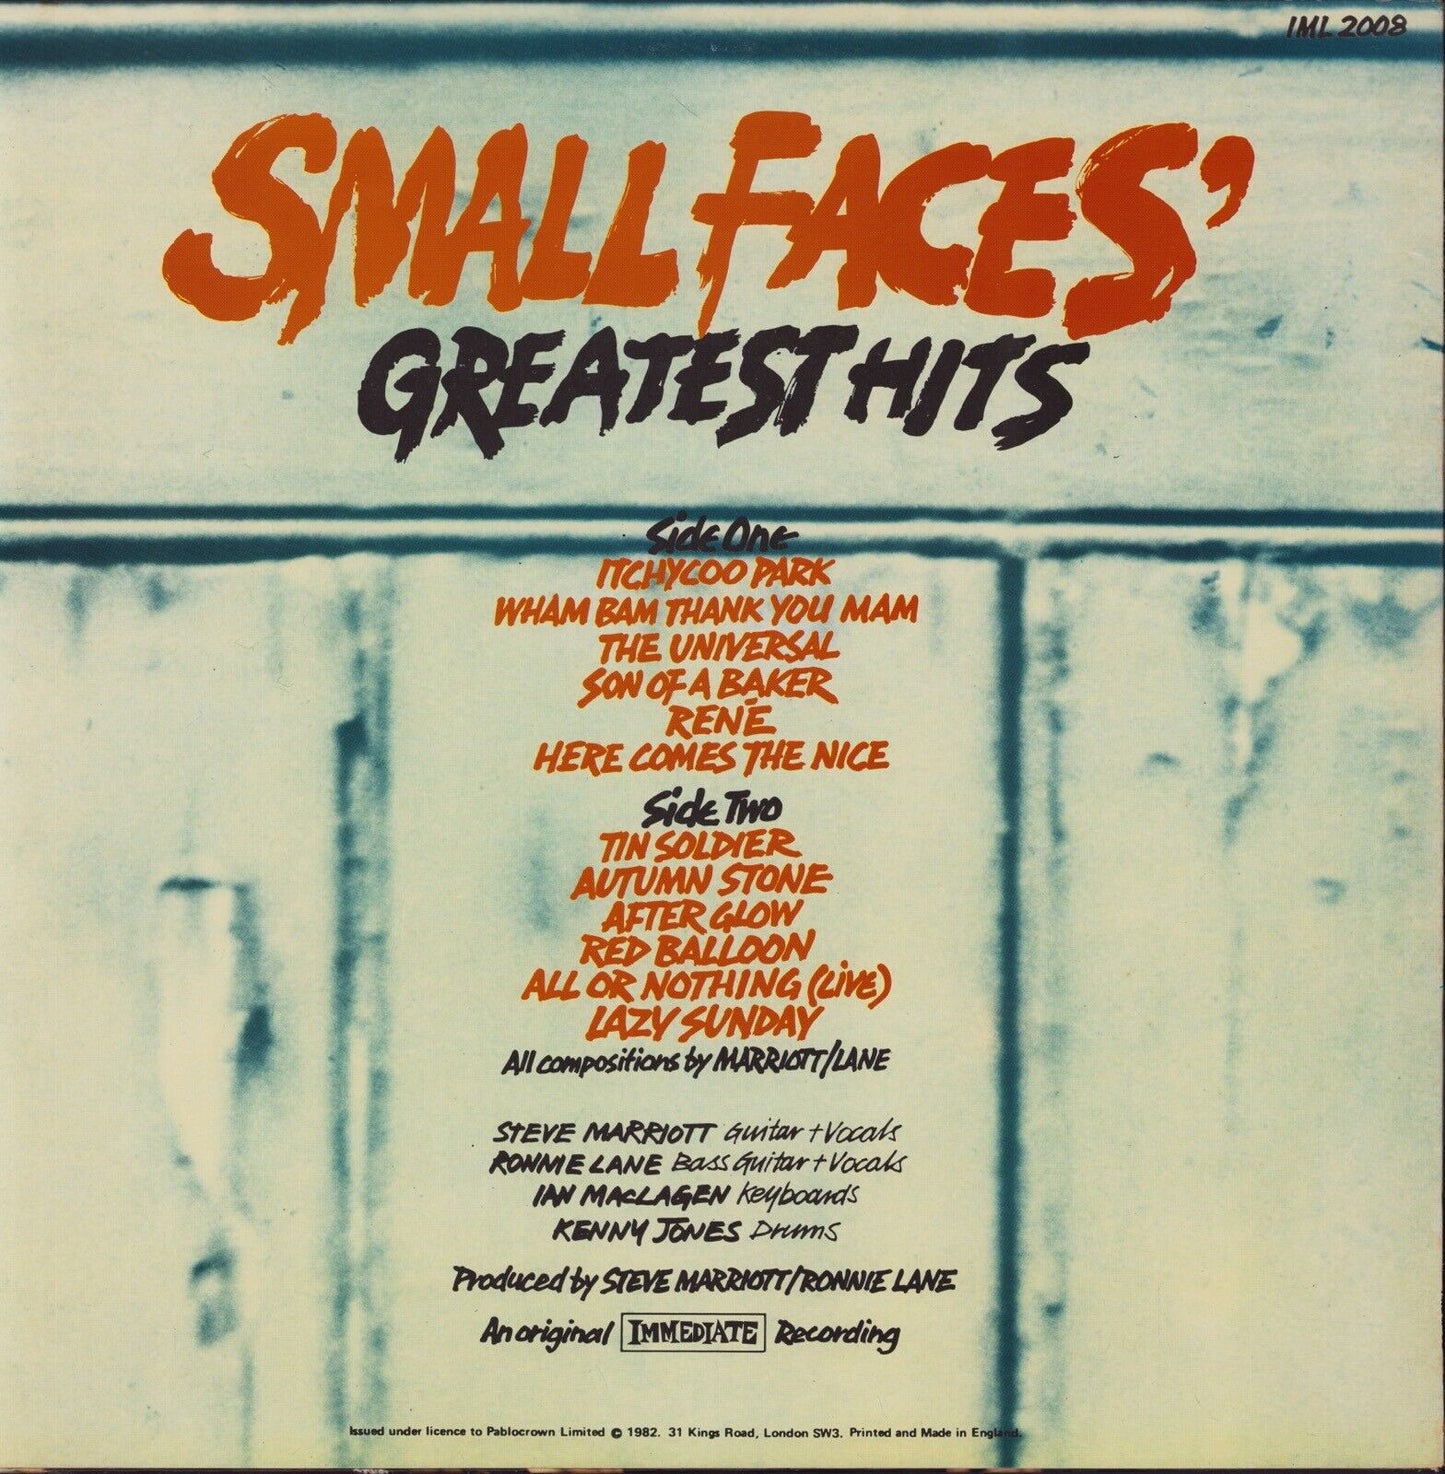 Small Faces - Small Faces' Greatest Hits Vinyl LP